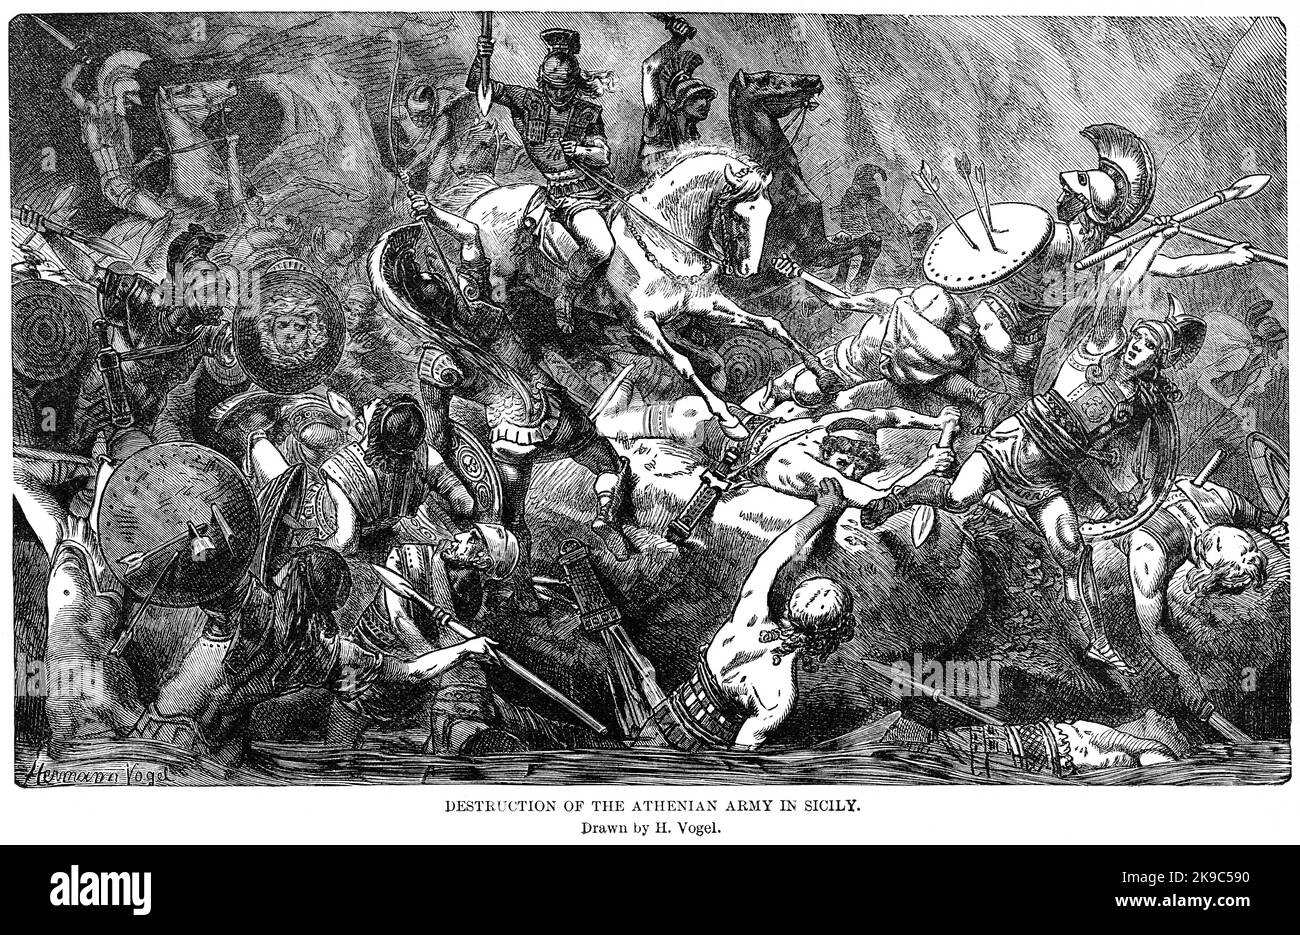 Destruction of the Athenian Army in Sicily, Illustration, Ridpath's History of the World, Volume I, by John Clark Ridpath, LL. D., Merrill & Baker Publishers, New York, 1894 Stock Photo